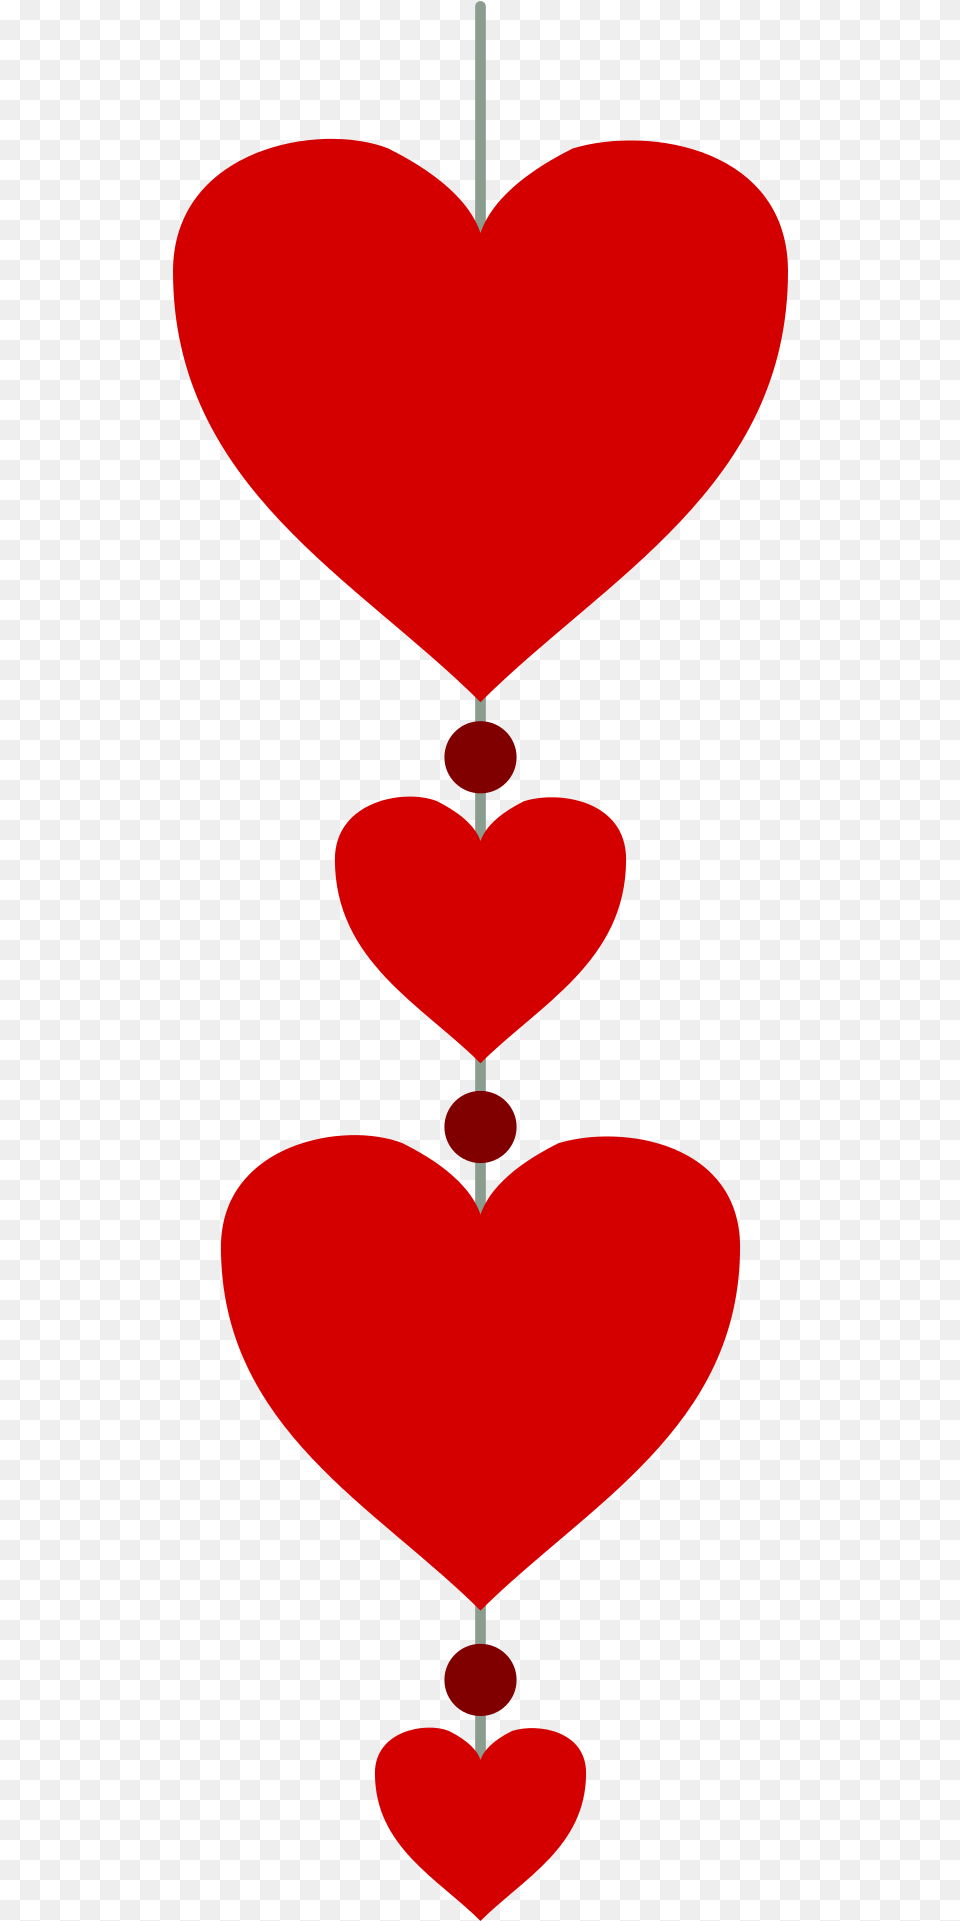 Hearts In A Vertical Line Vertical Line Of Hearts Png Image